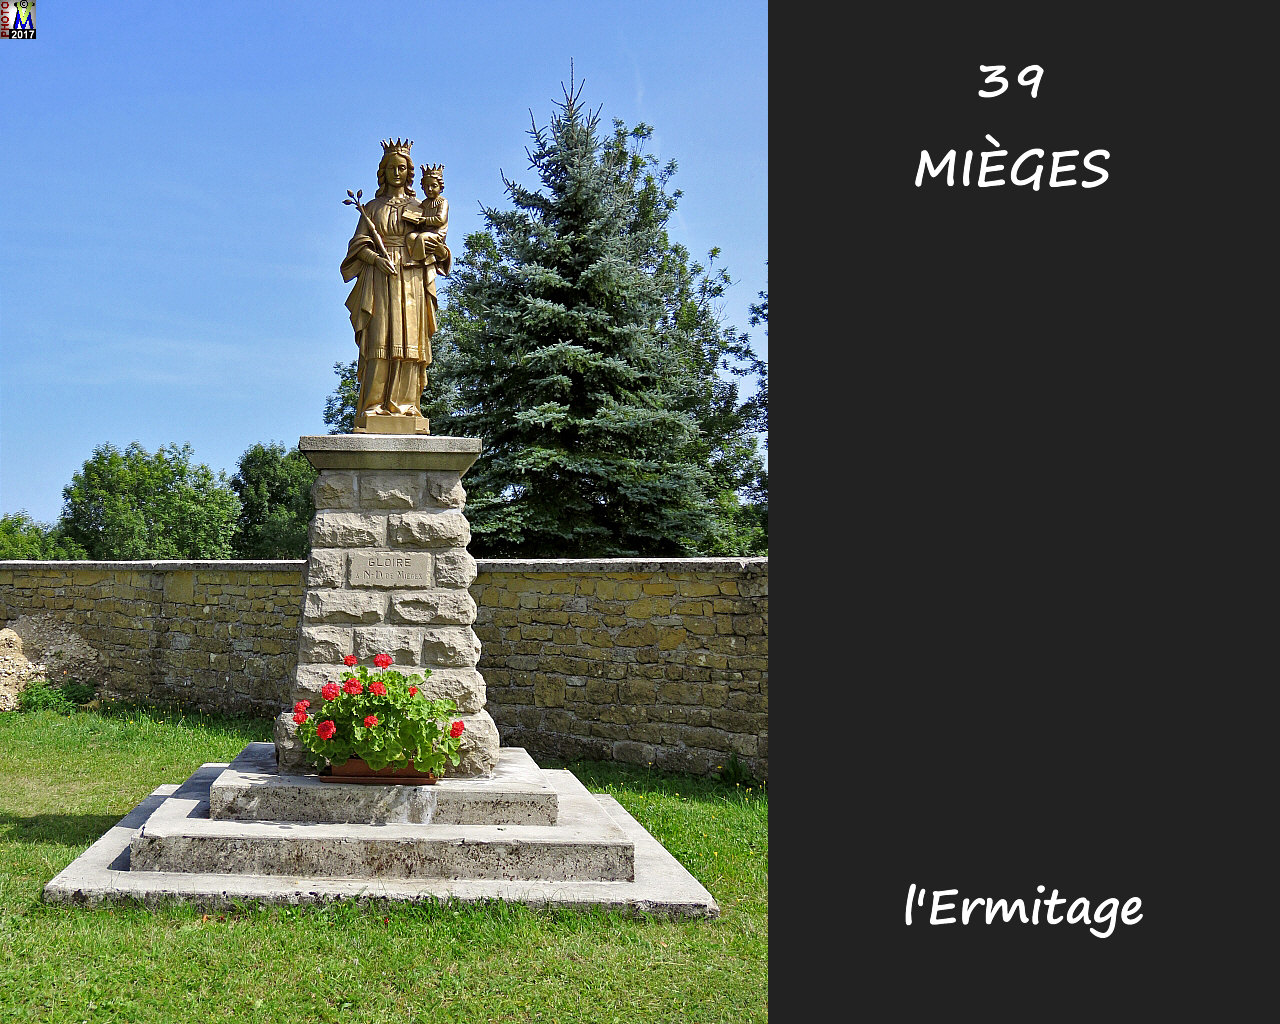 39MIEGES_Ermitage_150.jpg